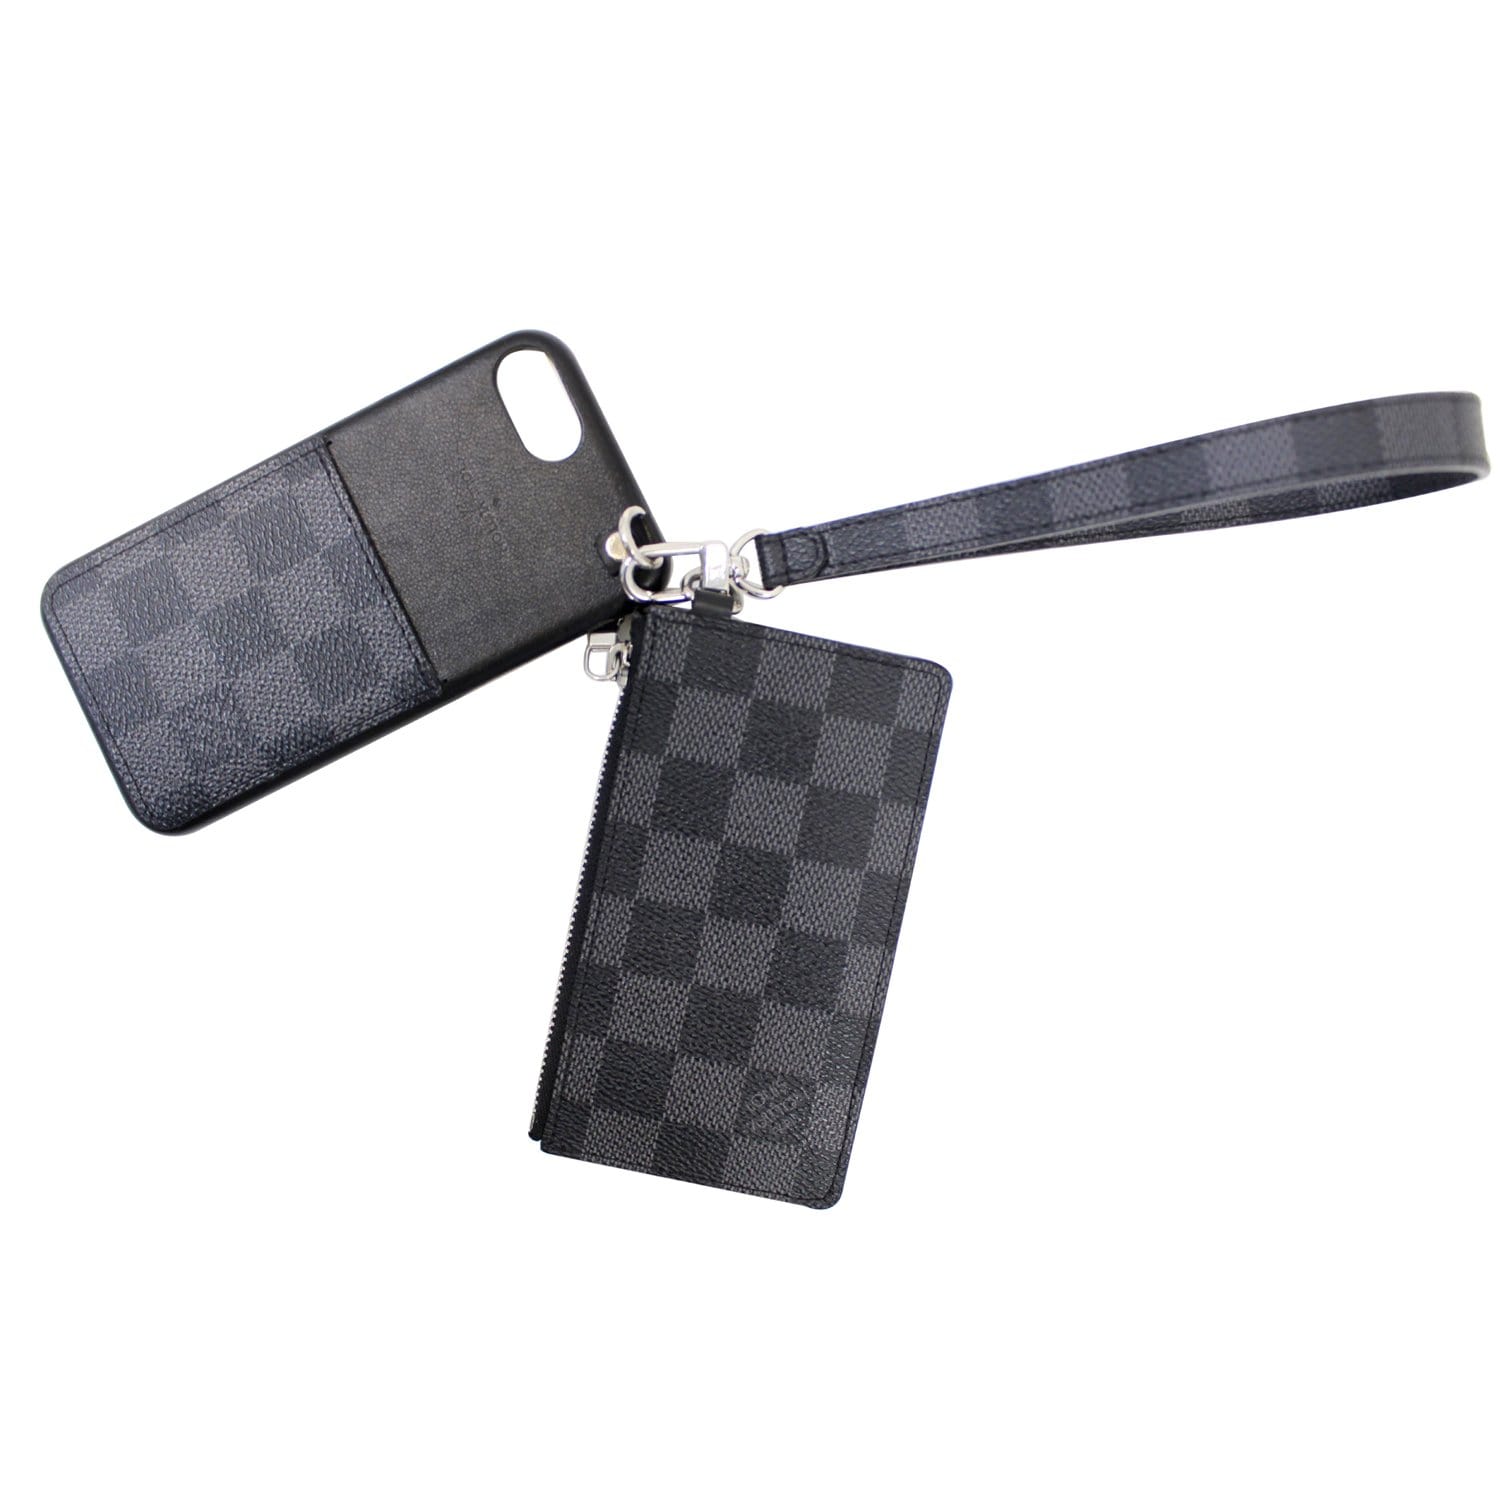 LOUIS VUITTON, cases for Ipad and Iphone 4 in damier graphite